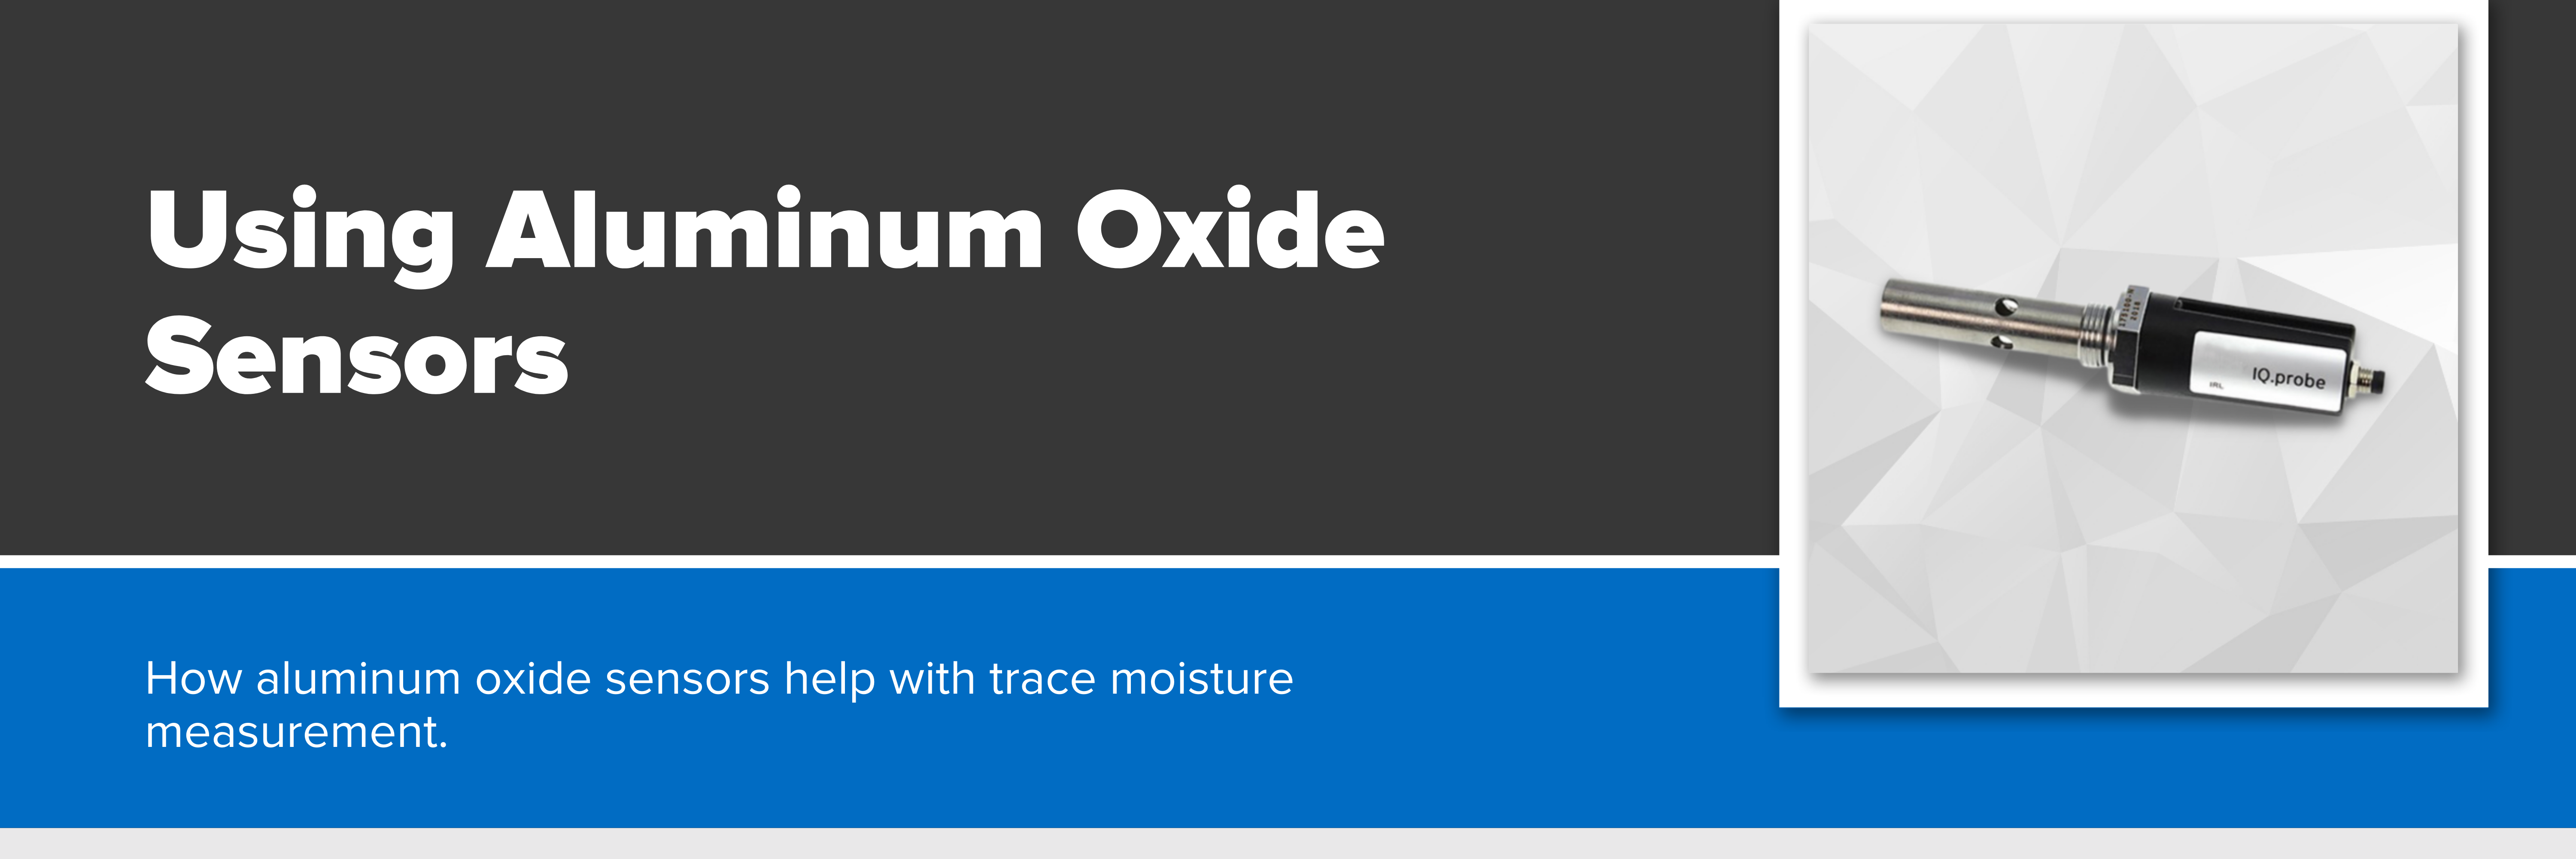 Header image with text "Using Aluminum Oxide Sensors for Trace Moisture"